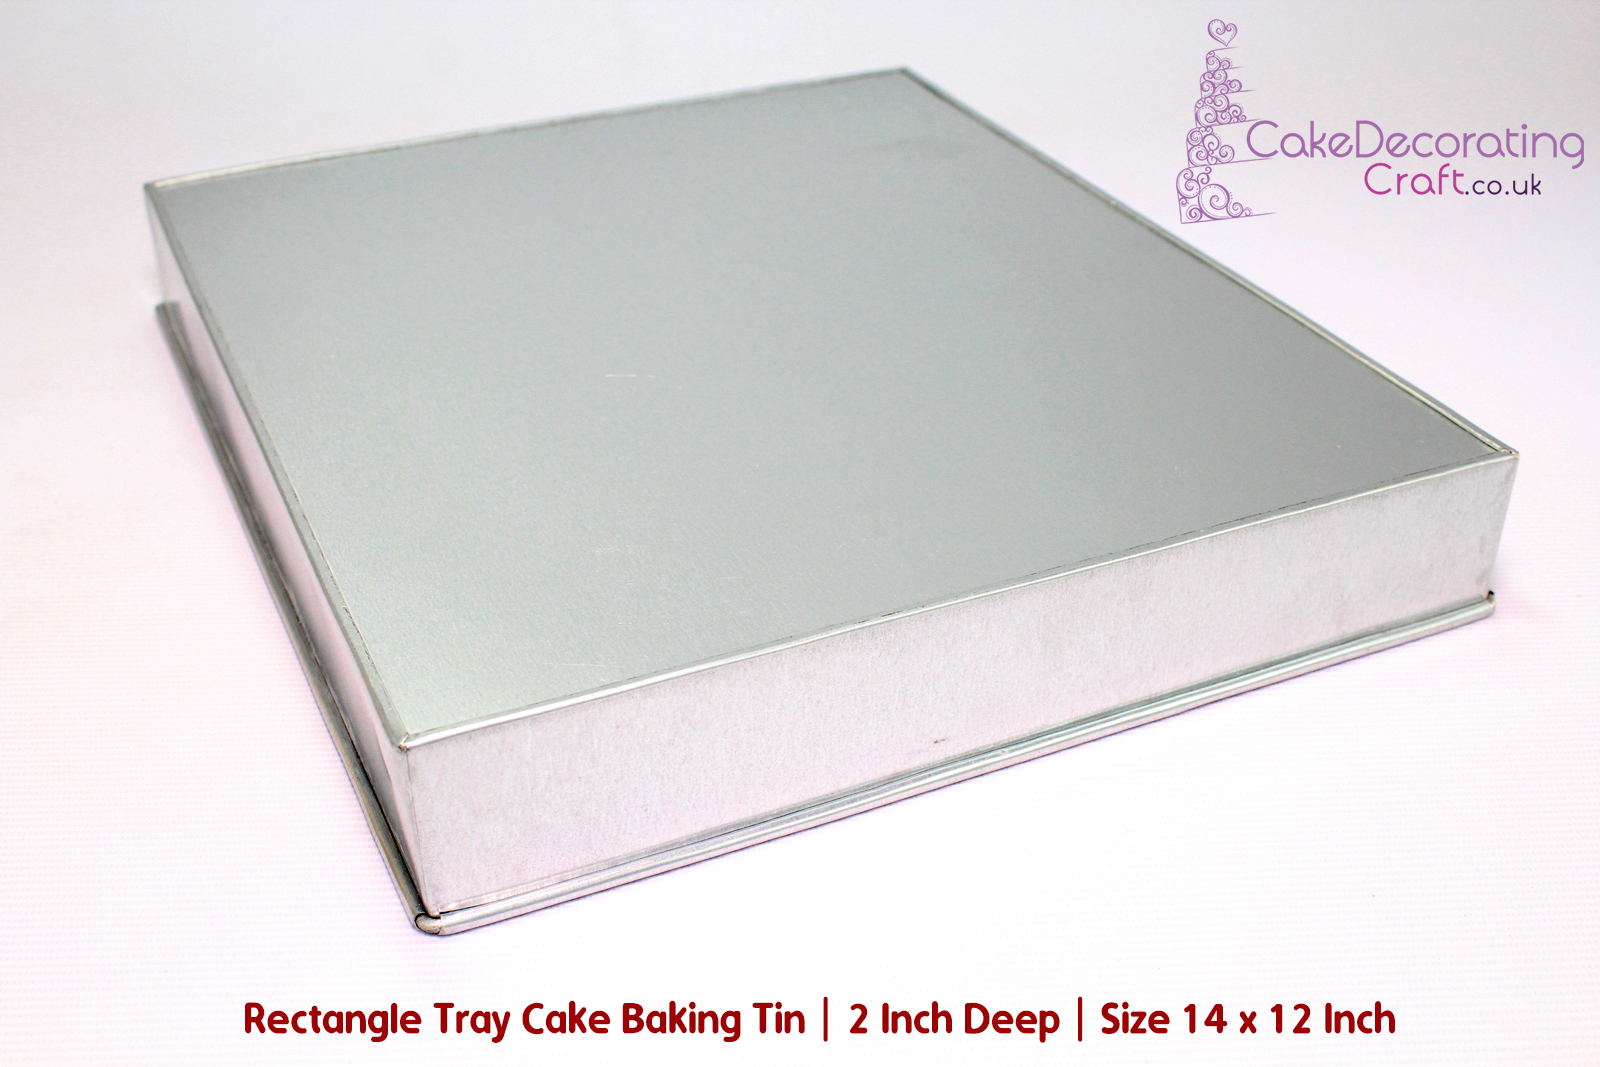 Rectangle Oblong Tray | Size 14 x 12  Inch | 2 Inch Deep | Cake Baking Tins